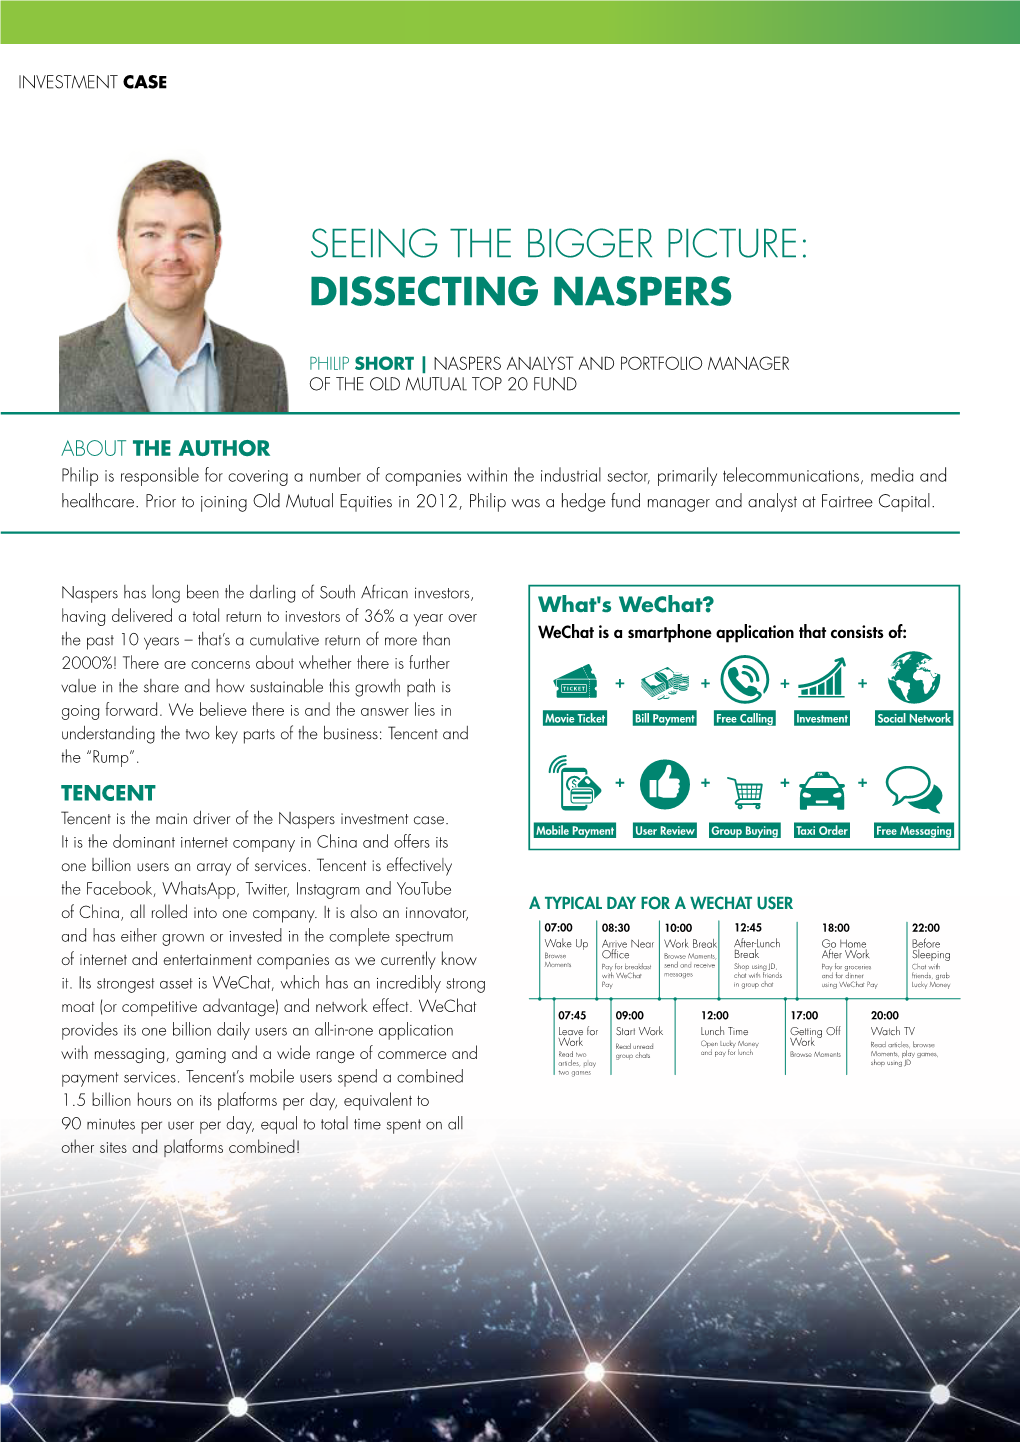 Dissecting Naspers